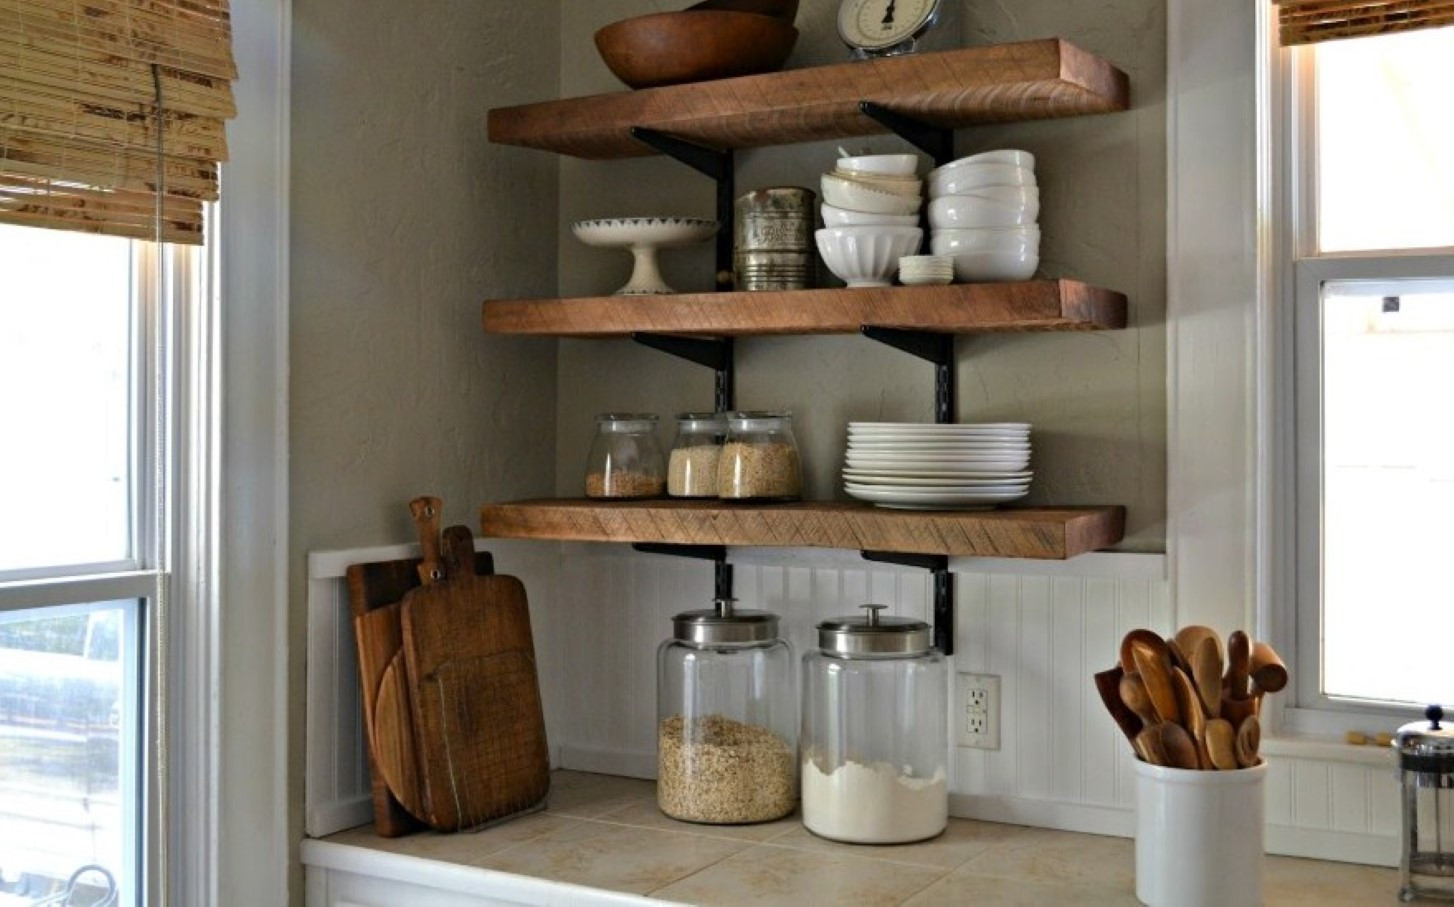 Kitchen Wall Shelves
 Go Creative with DIY Wall Shelves in Your Interior – HomesFeed